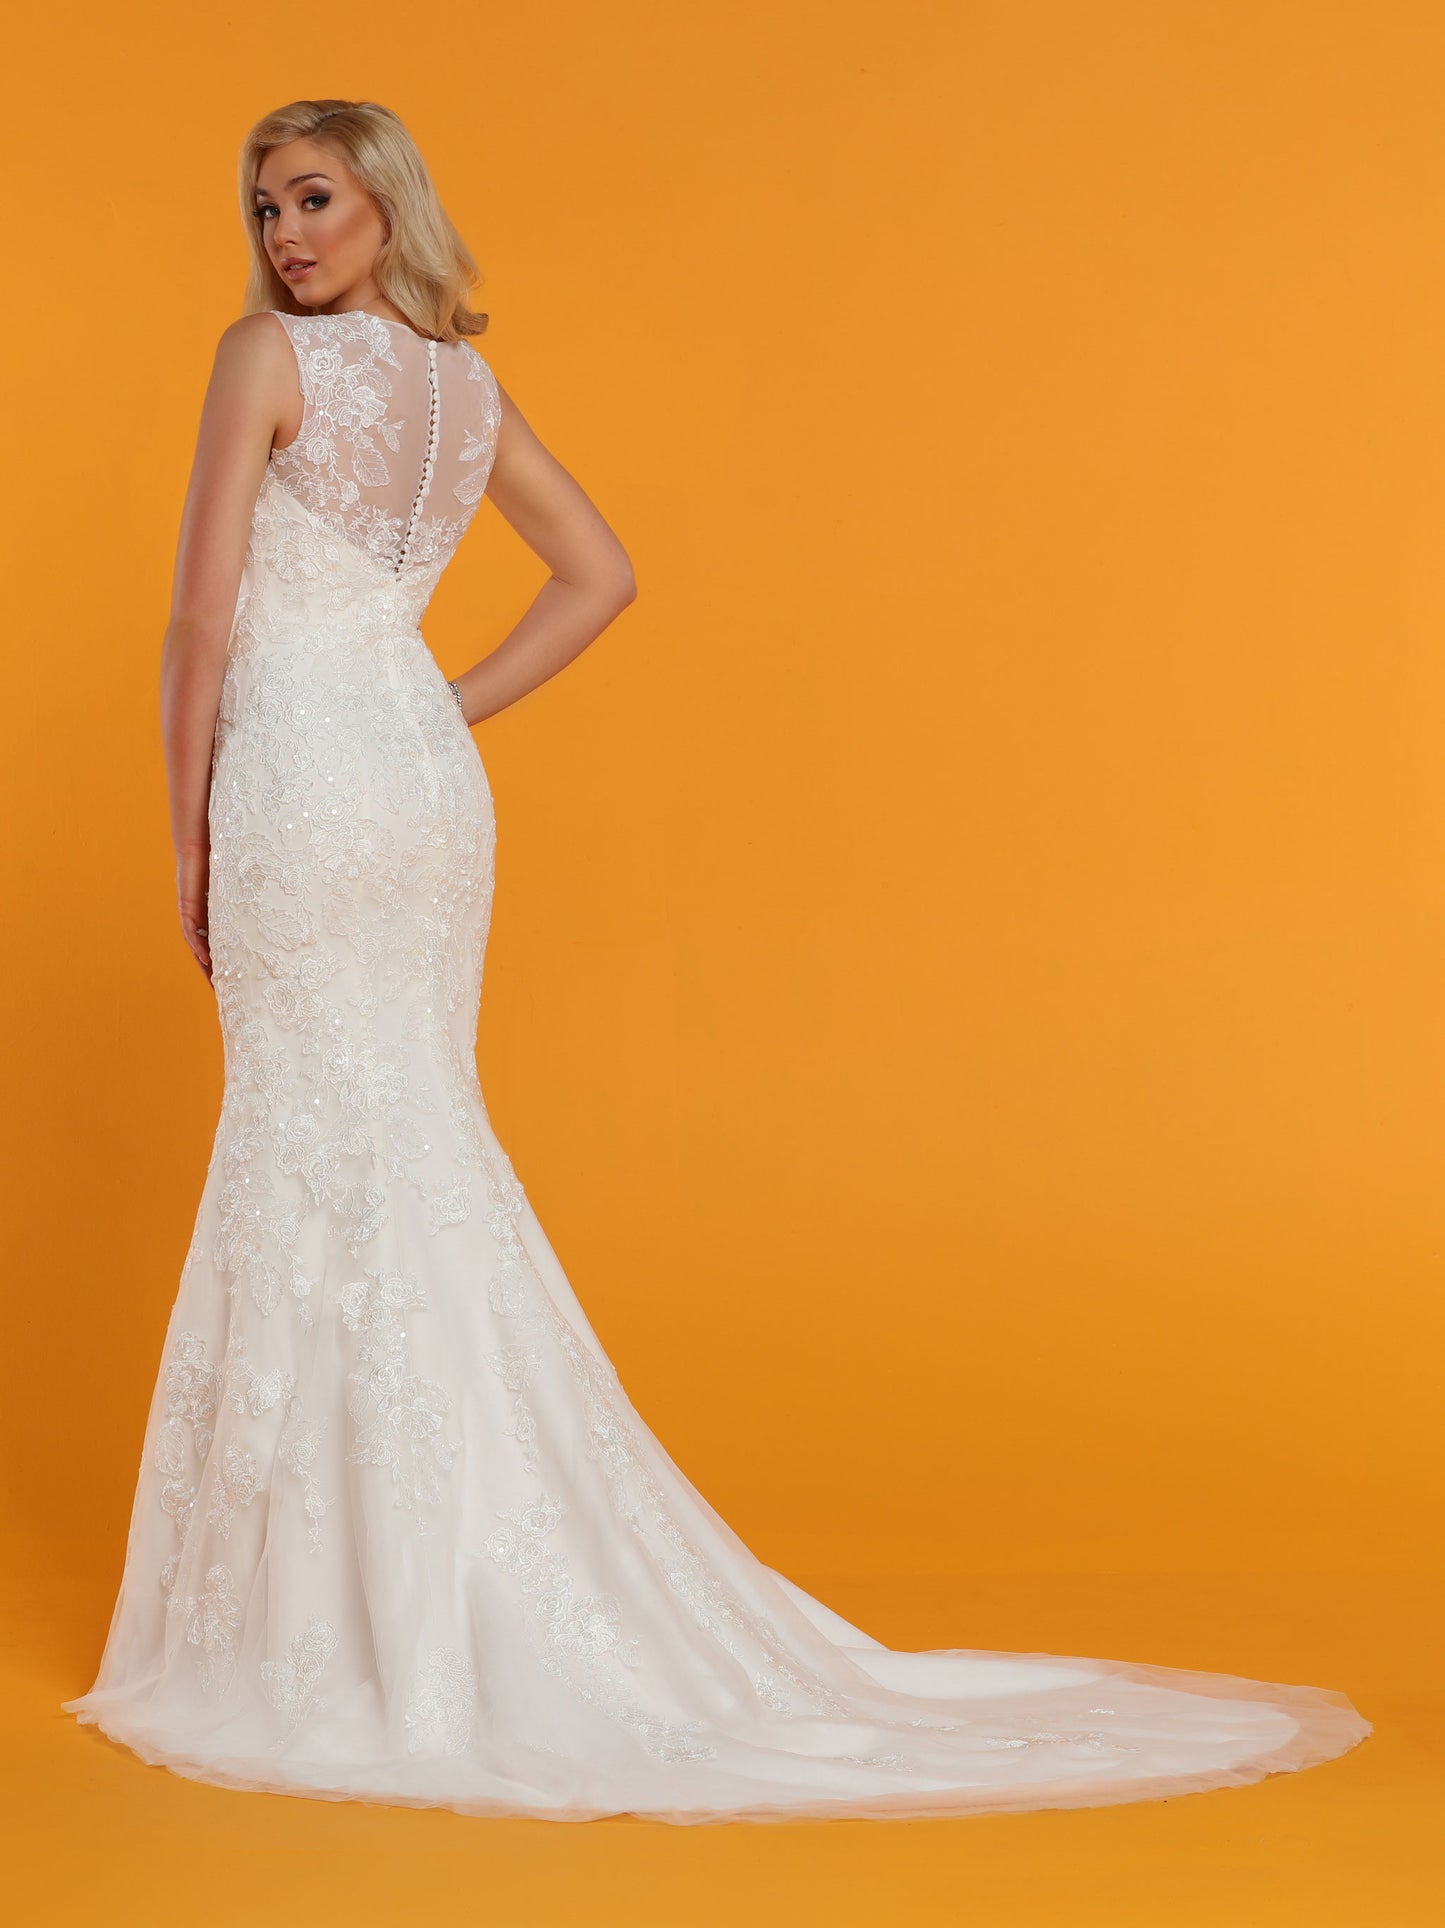 Davinci Bridal 50523 is a Long Fitted Fit & Flare Mermaid Embellished Wedding Dress. Featuring sheer lace embellished straps and back with button lined closure. Sequins scattered throughout the entire gown for a magical look.  Available for 1-2 Week Delivery!!!  Available Sizes: 2,4,6,8,10,12,14,16,18,20